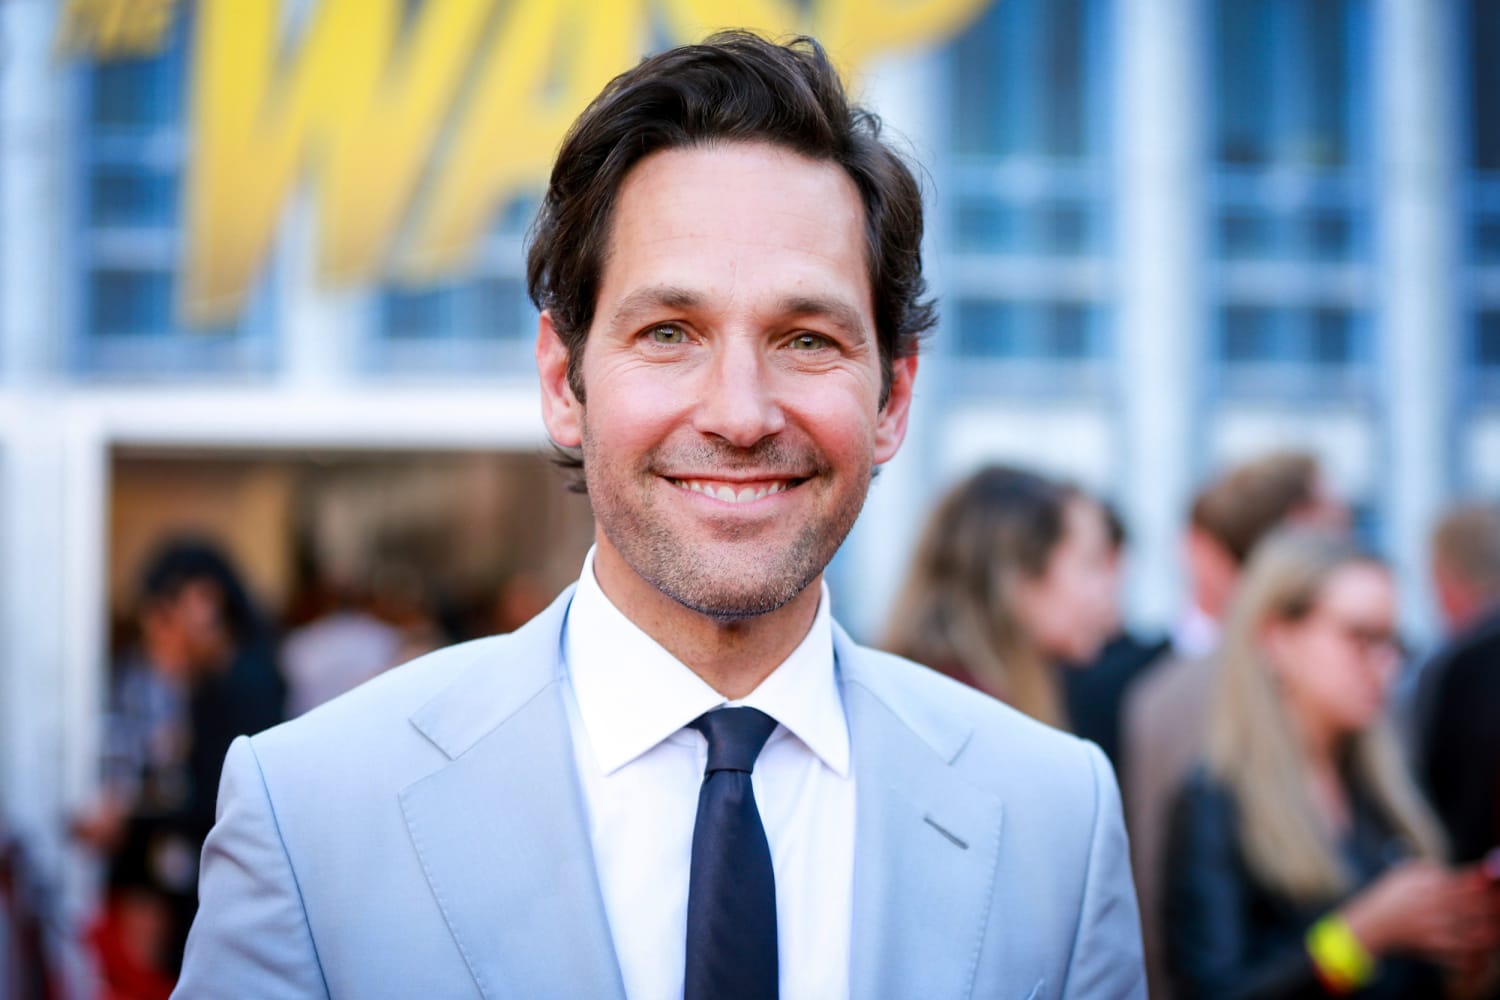 Paul Rudd is PEOPLE's Sexiest Man Alive for 2021